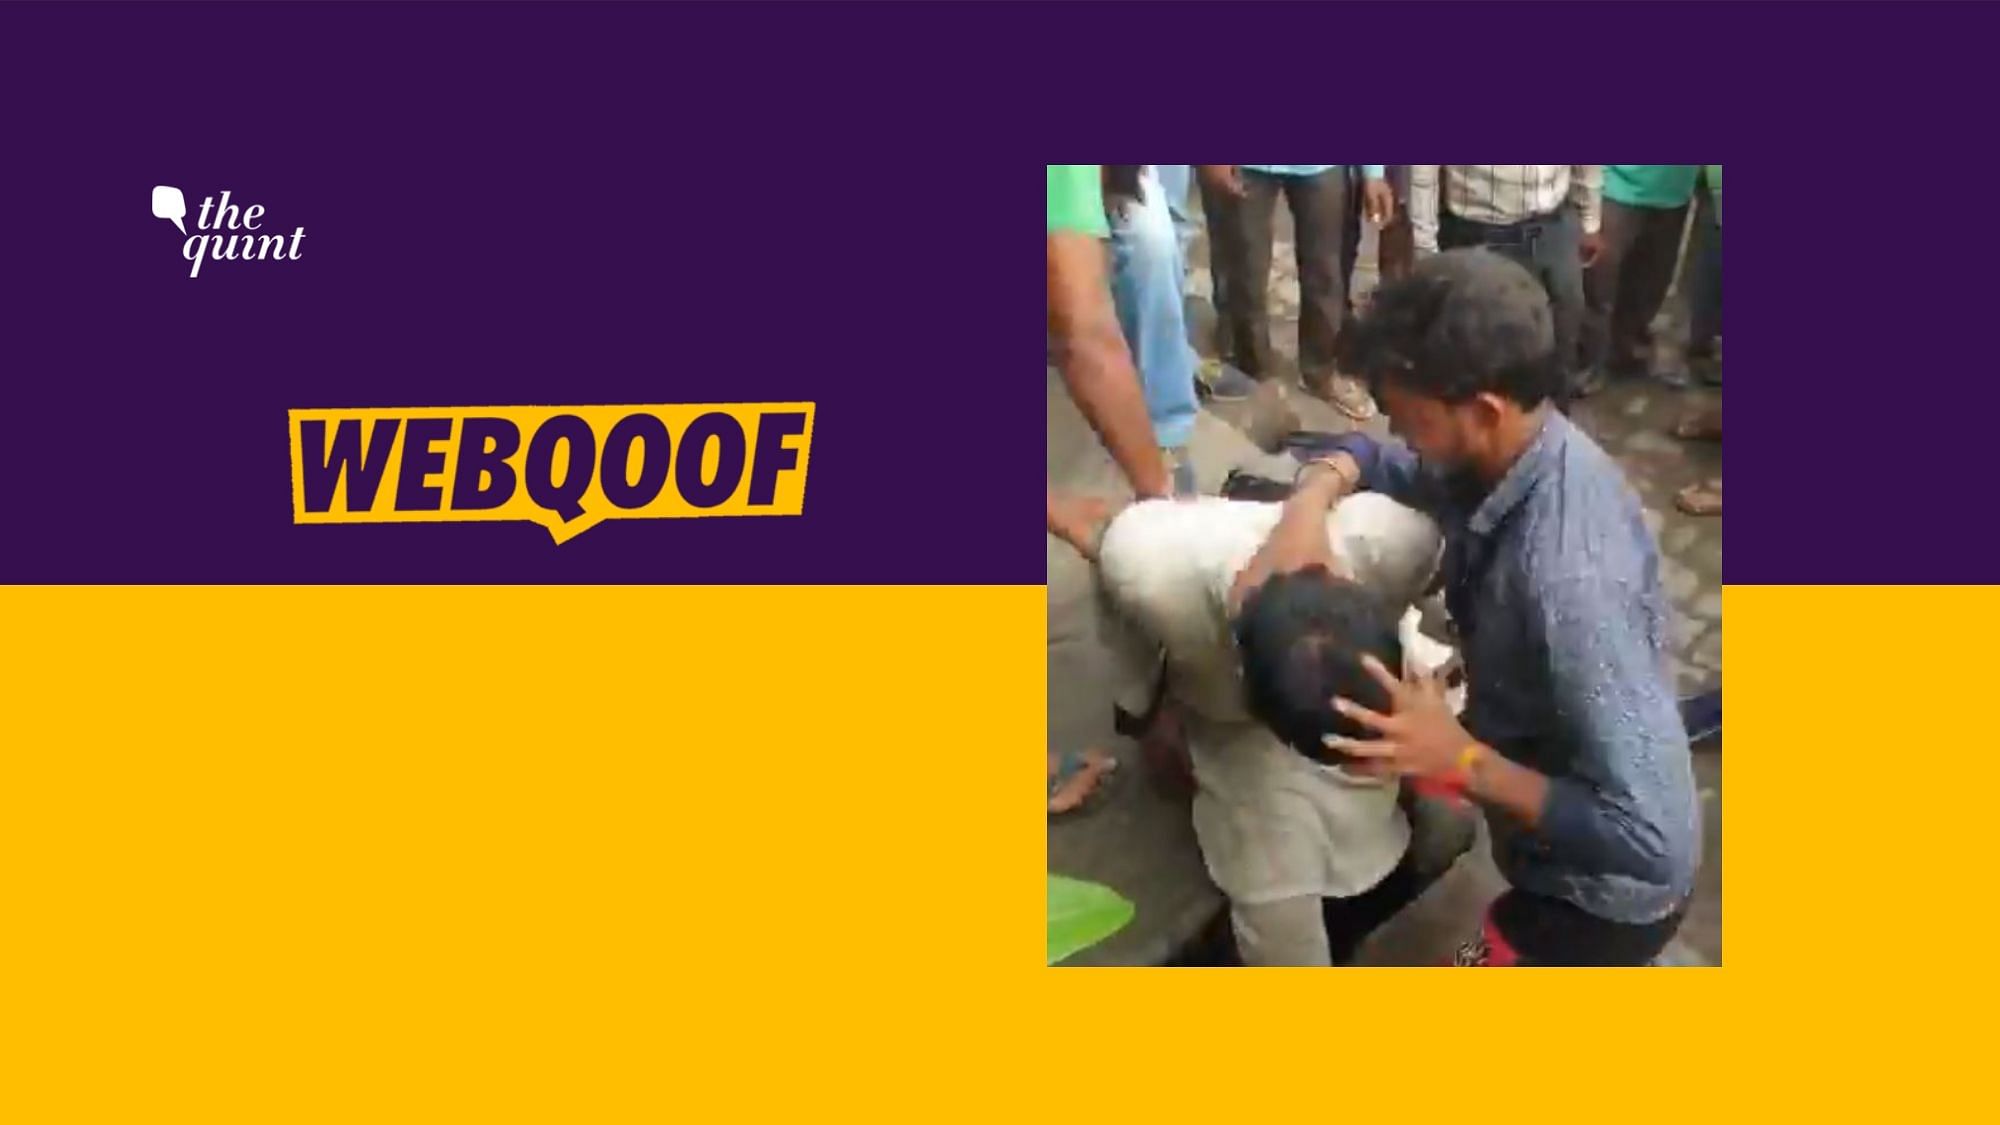 The video shows a man in white kurta being thrashed by the mob around him in broad daylight.